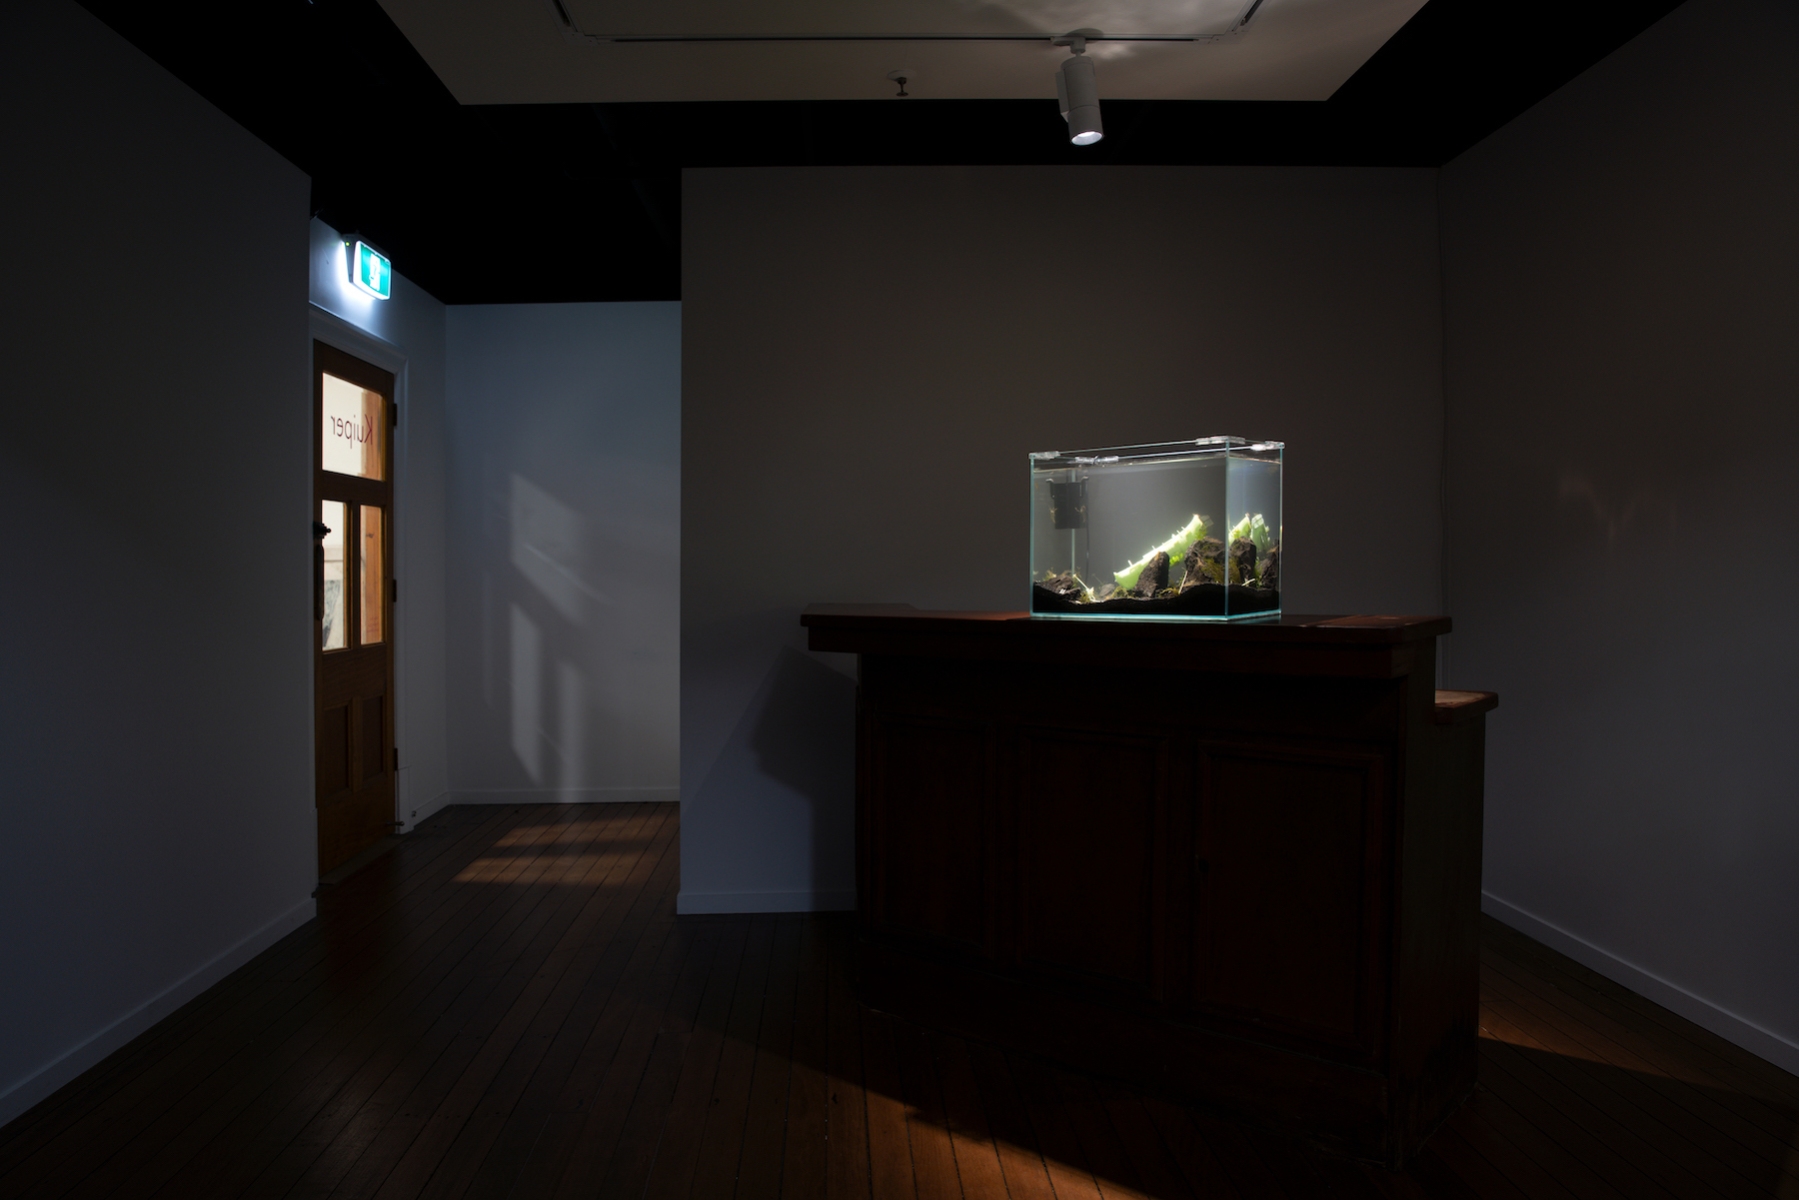 A darkly lit room, with timber floorboards and white walls. On the right hand side is an arched timber bar, with a fish tank placed on top